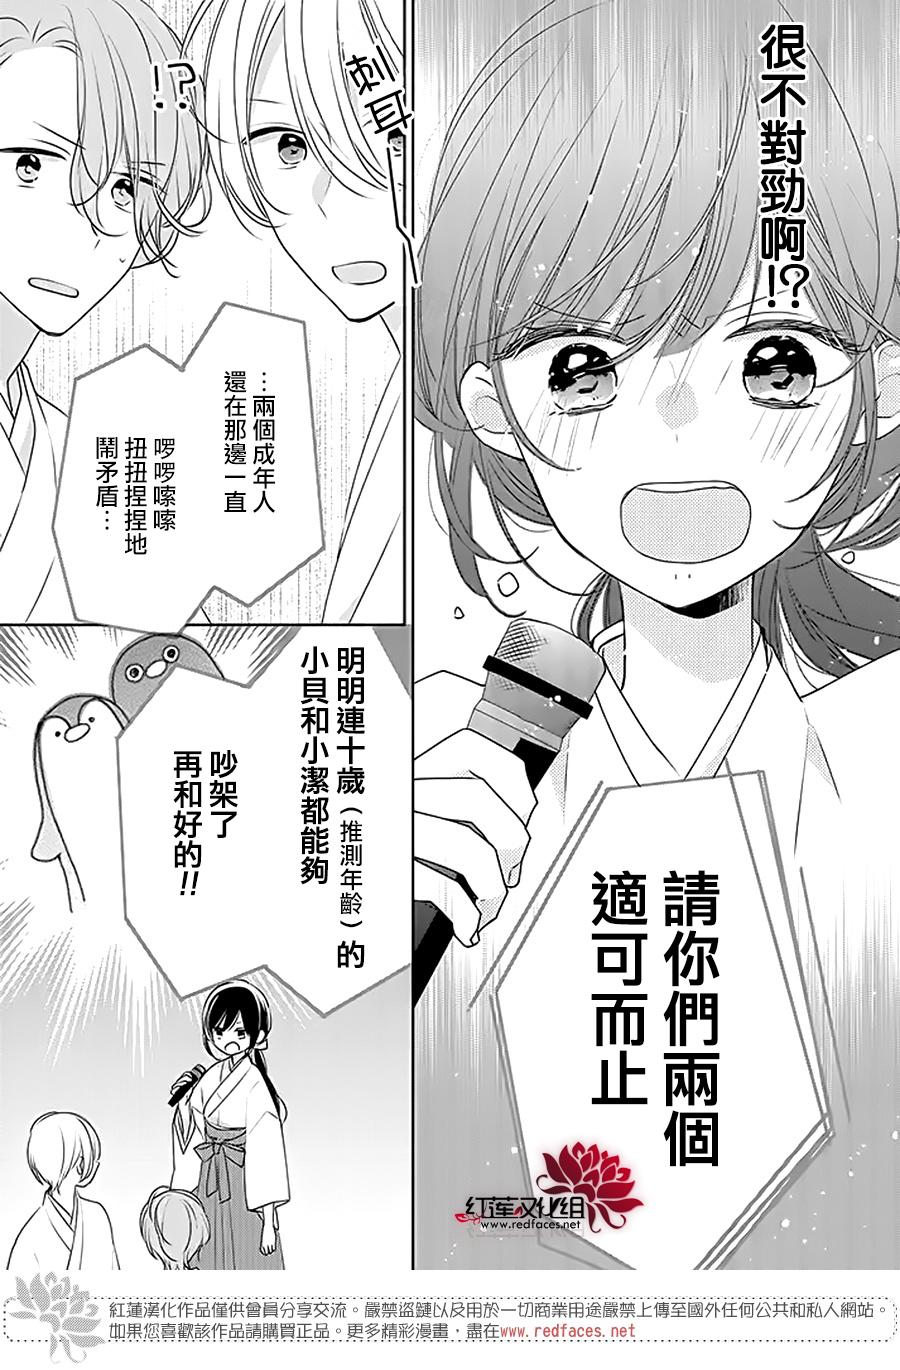 If given a second chance - 28話 - 5